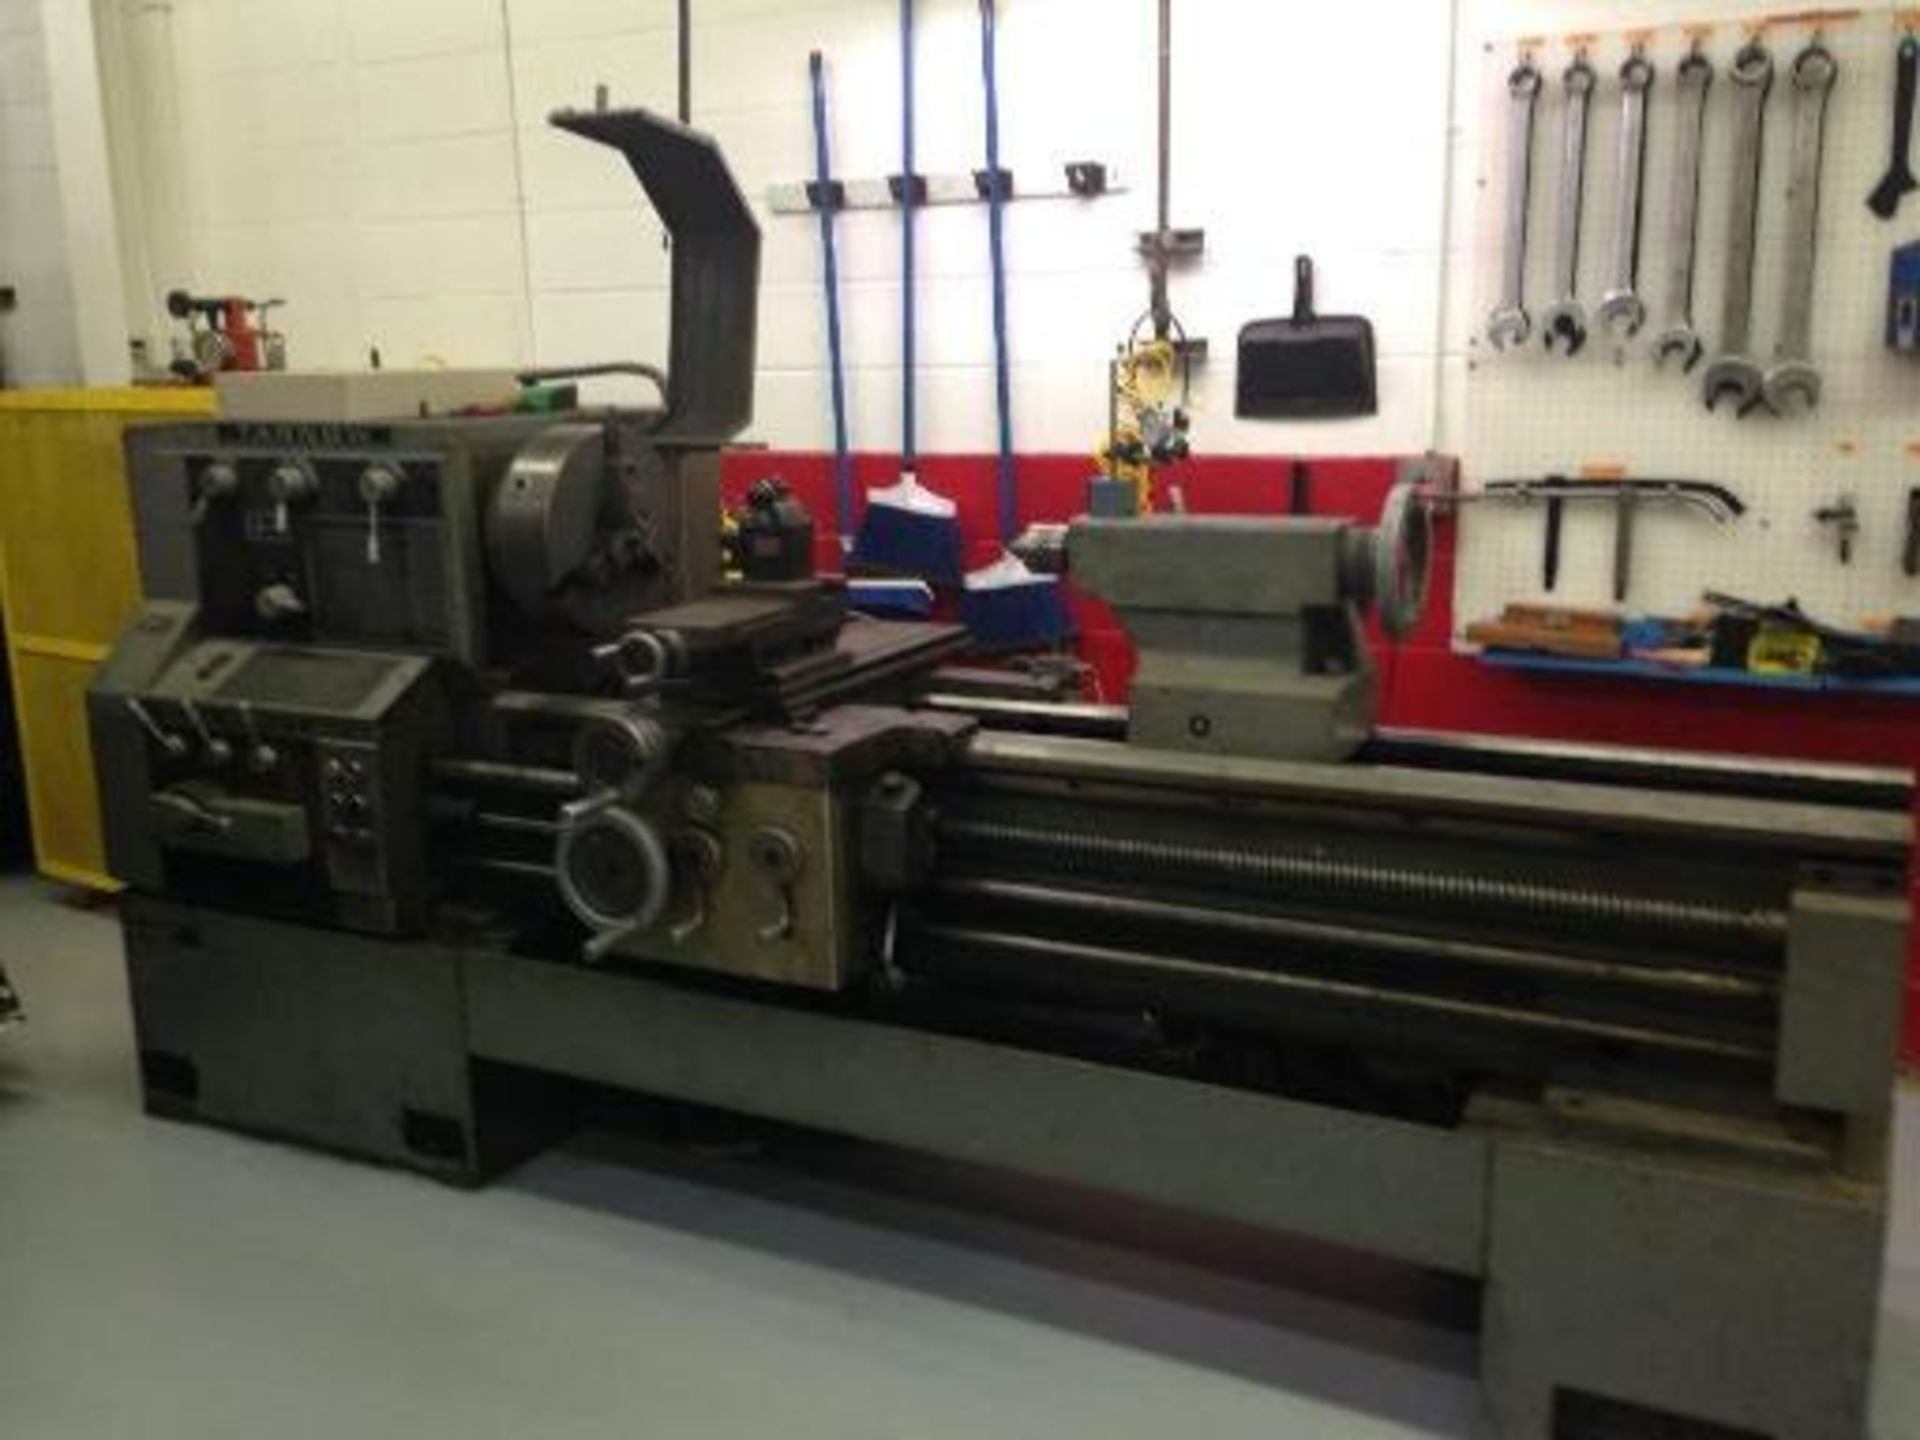 Tarnow engine lathe (may need work) with tooling. Located in Marion, Ohio Rigging Fee: $400